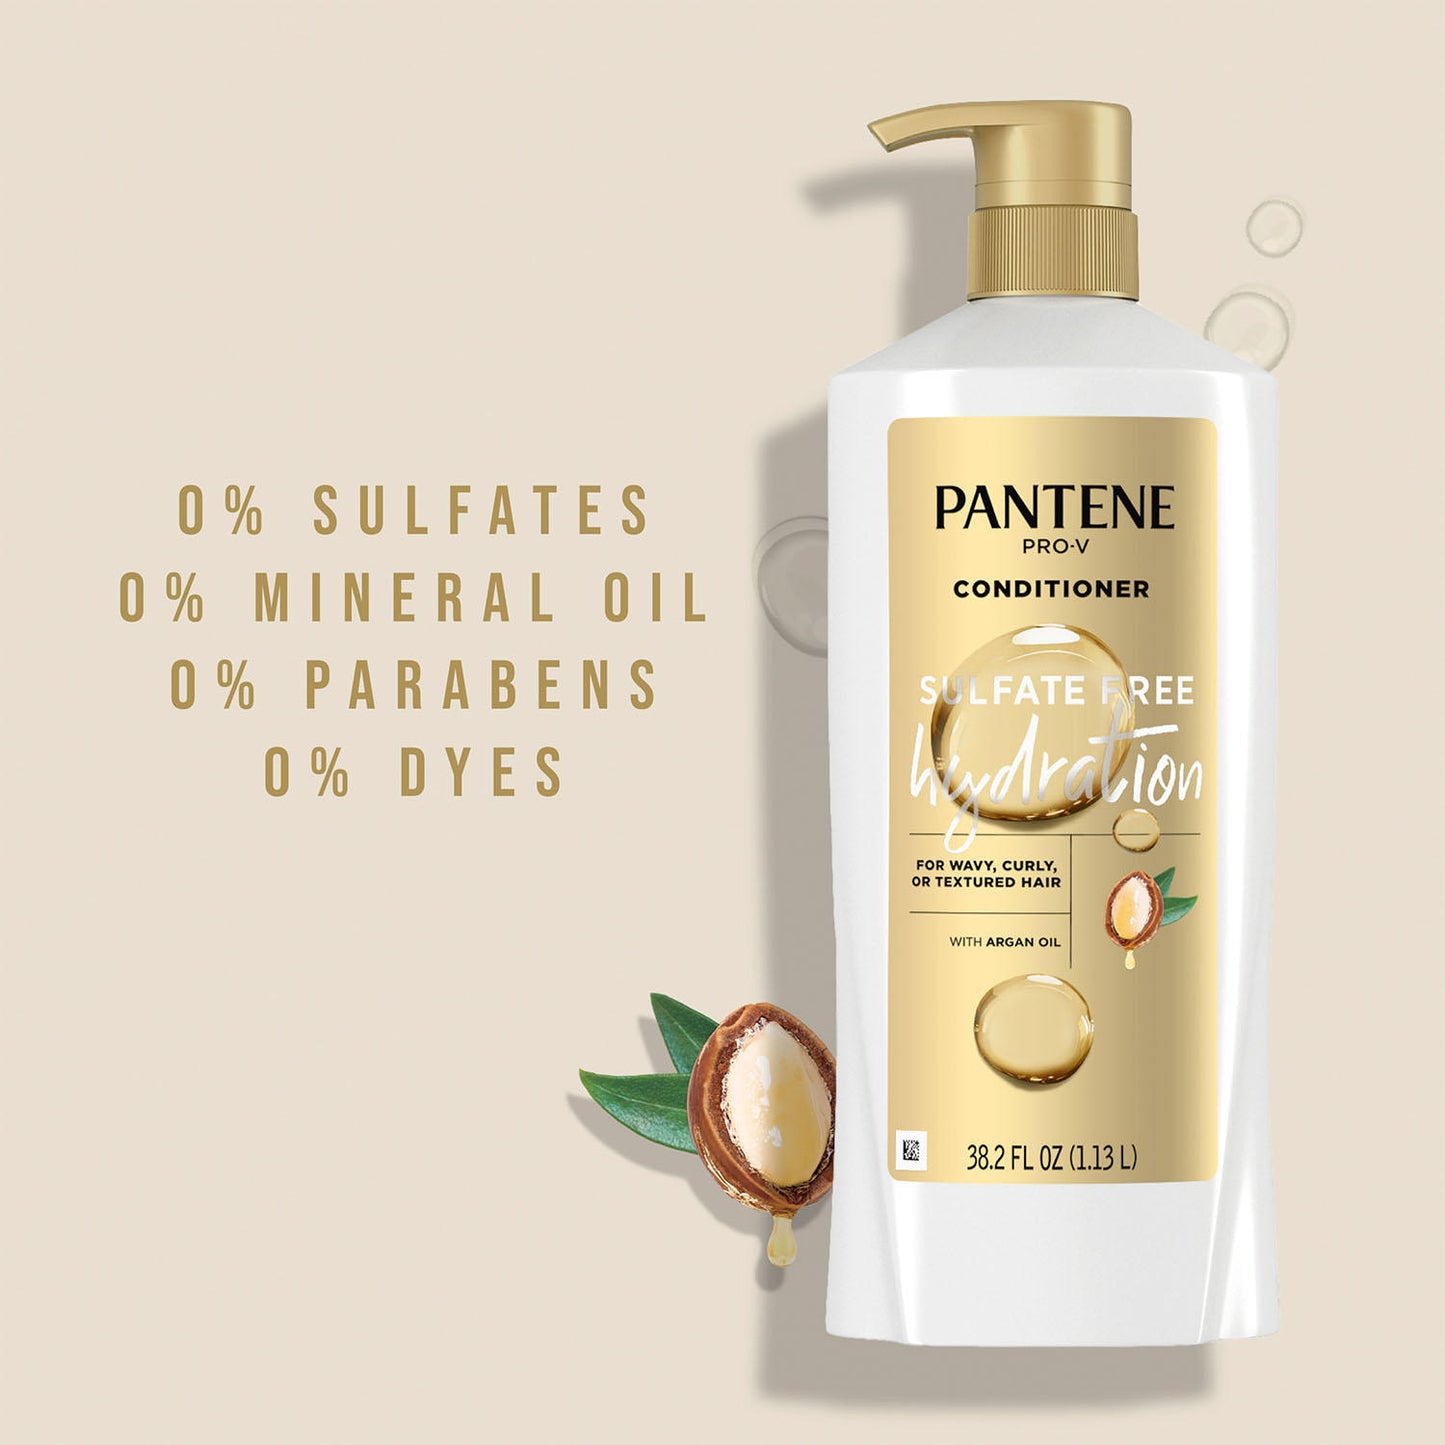 Pantene Pro-V Sulfate Free Hydration Conditioner with Argan Oil (38.2 fl. oz.)